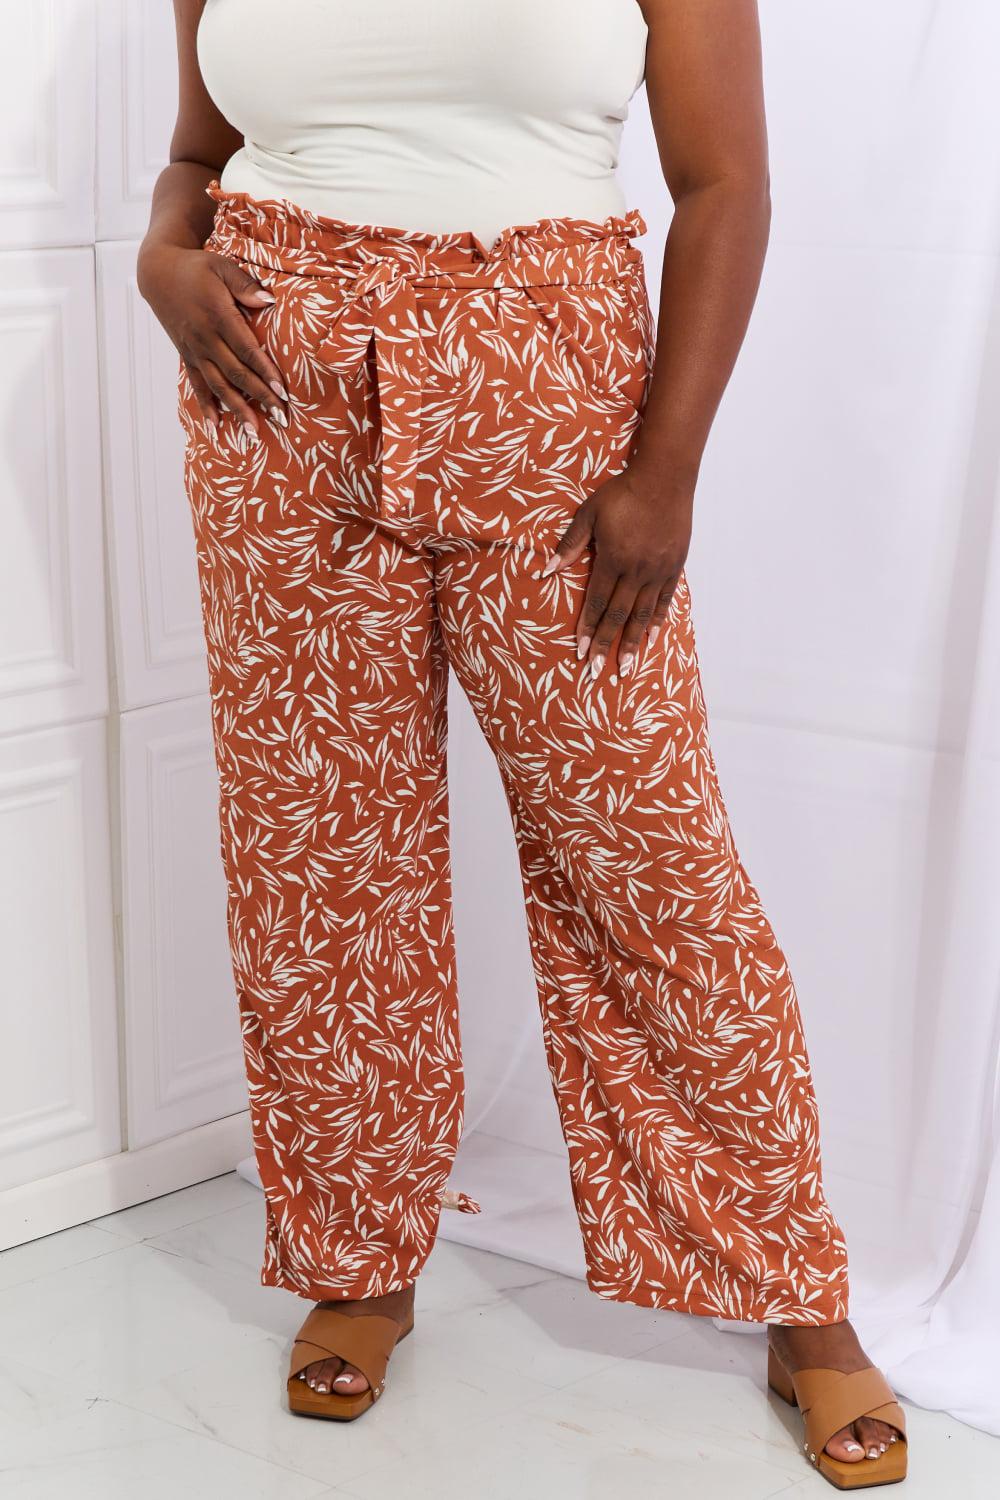 Heimish Right Angle Full Size Geometric Printed Pants in Red Orange BLUE ZONE PLANET